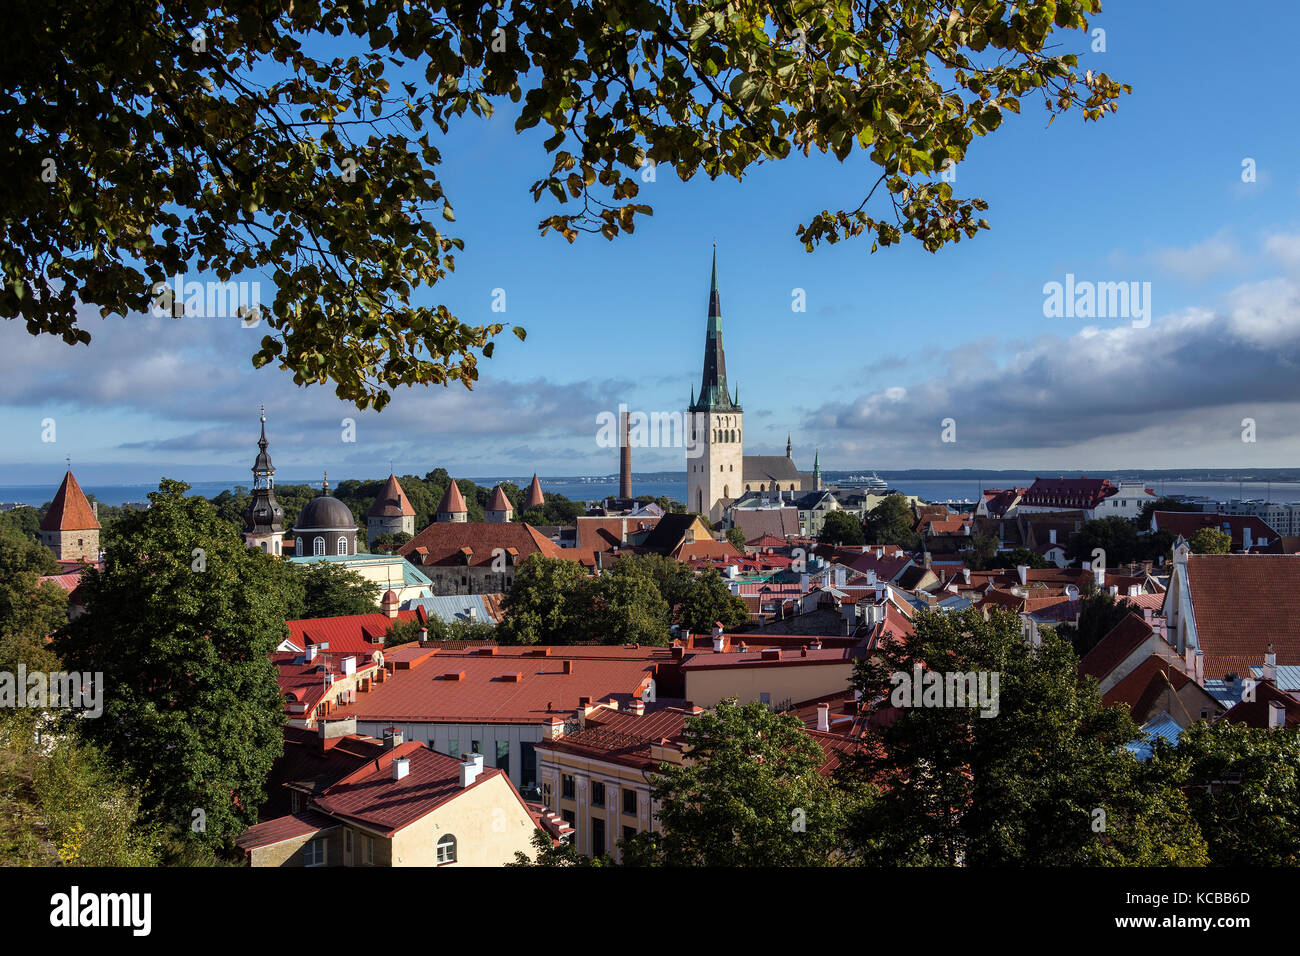 The city of Tallinn in Estonia. The Old Town is one of the best preserved medieval cities in Europe and is a UNESCO World Heritage Site. Stock Photo